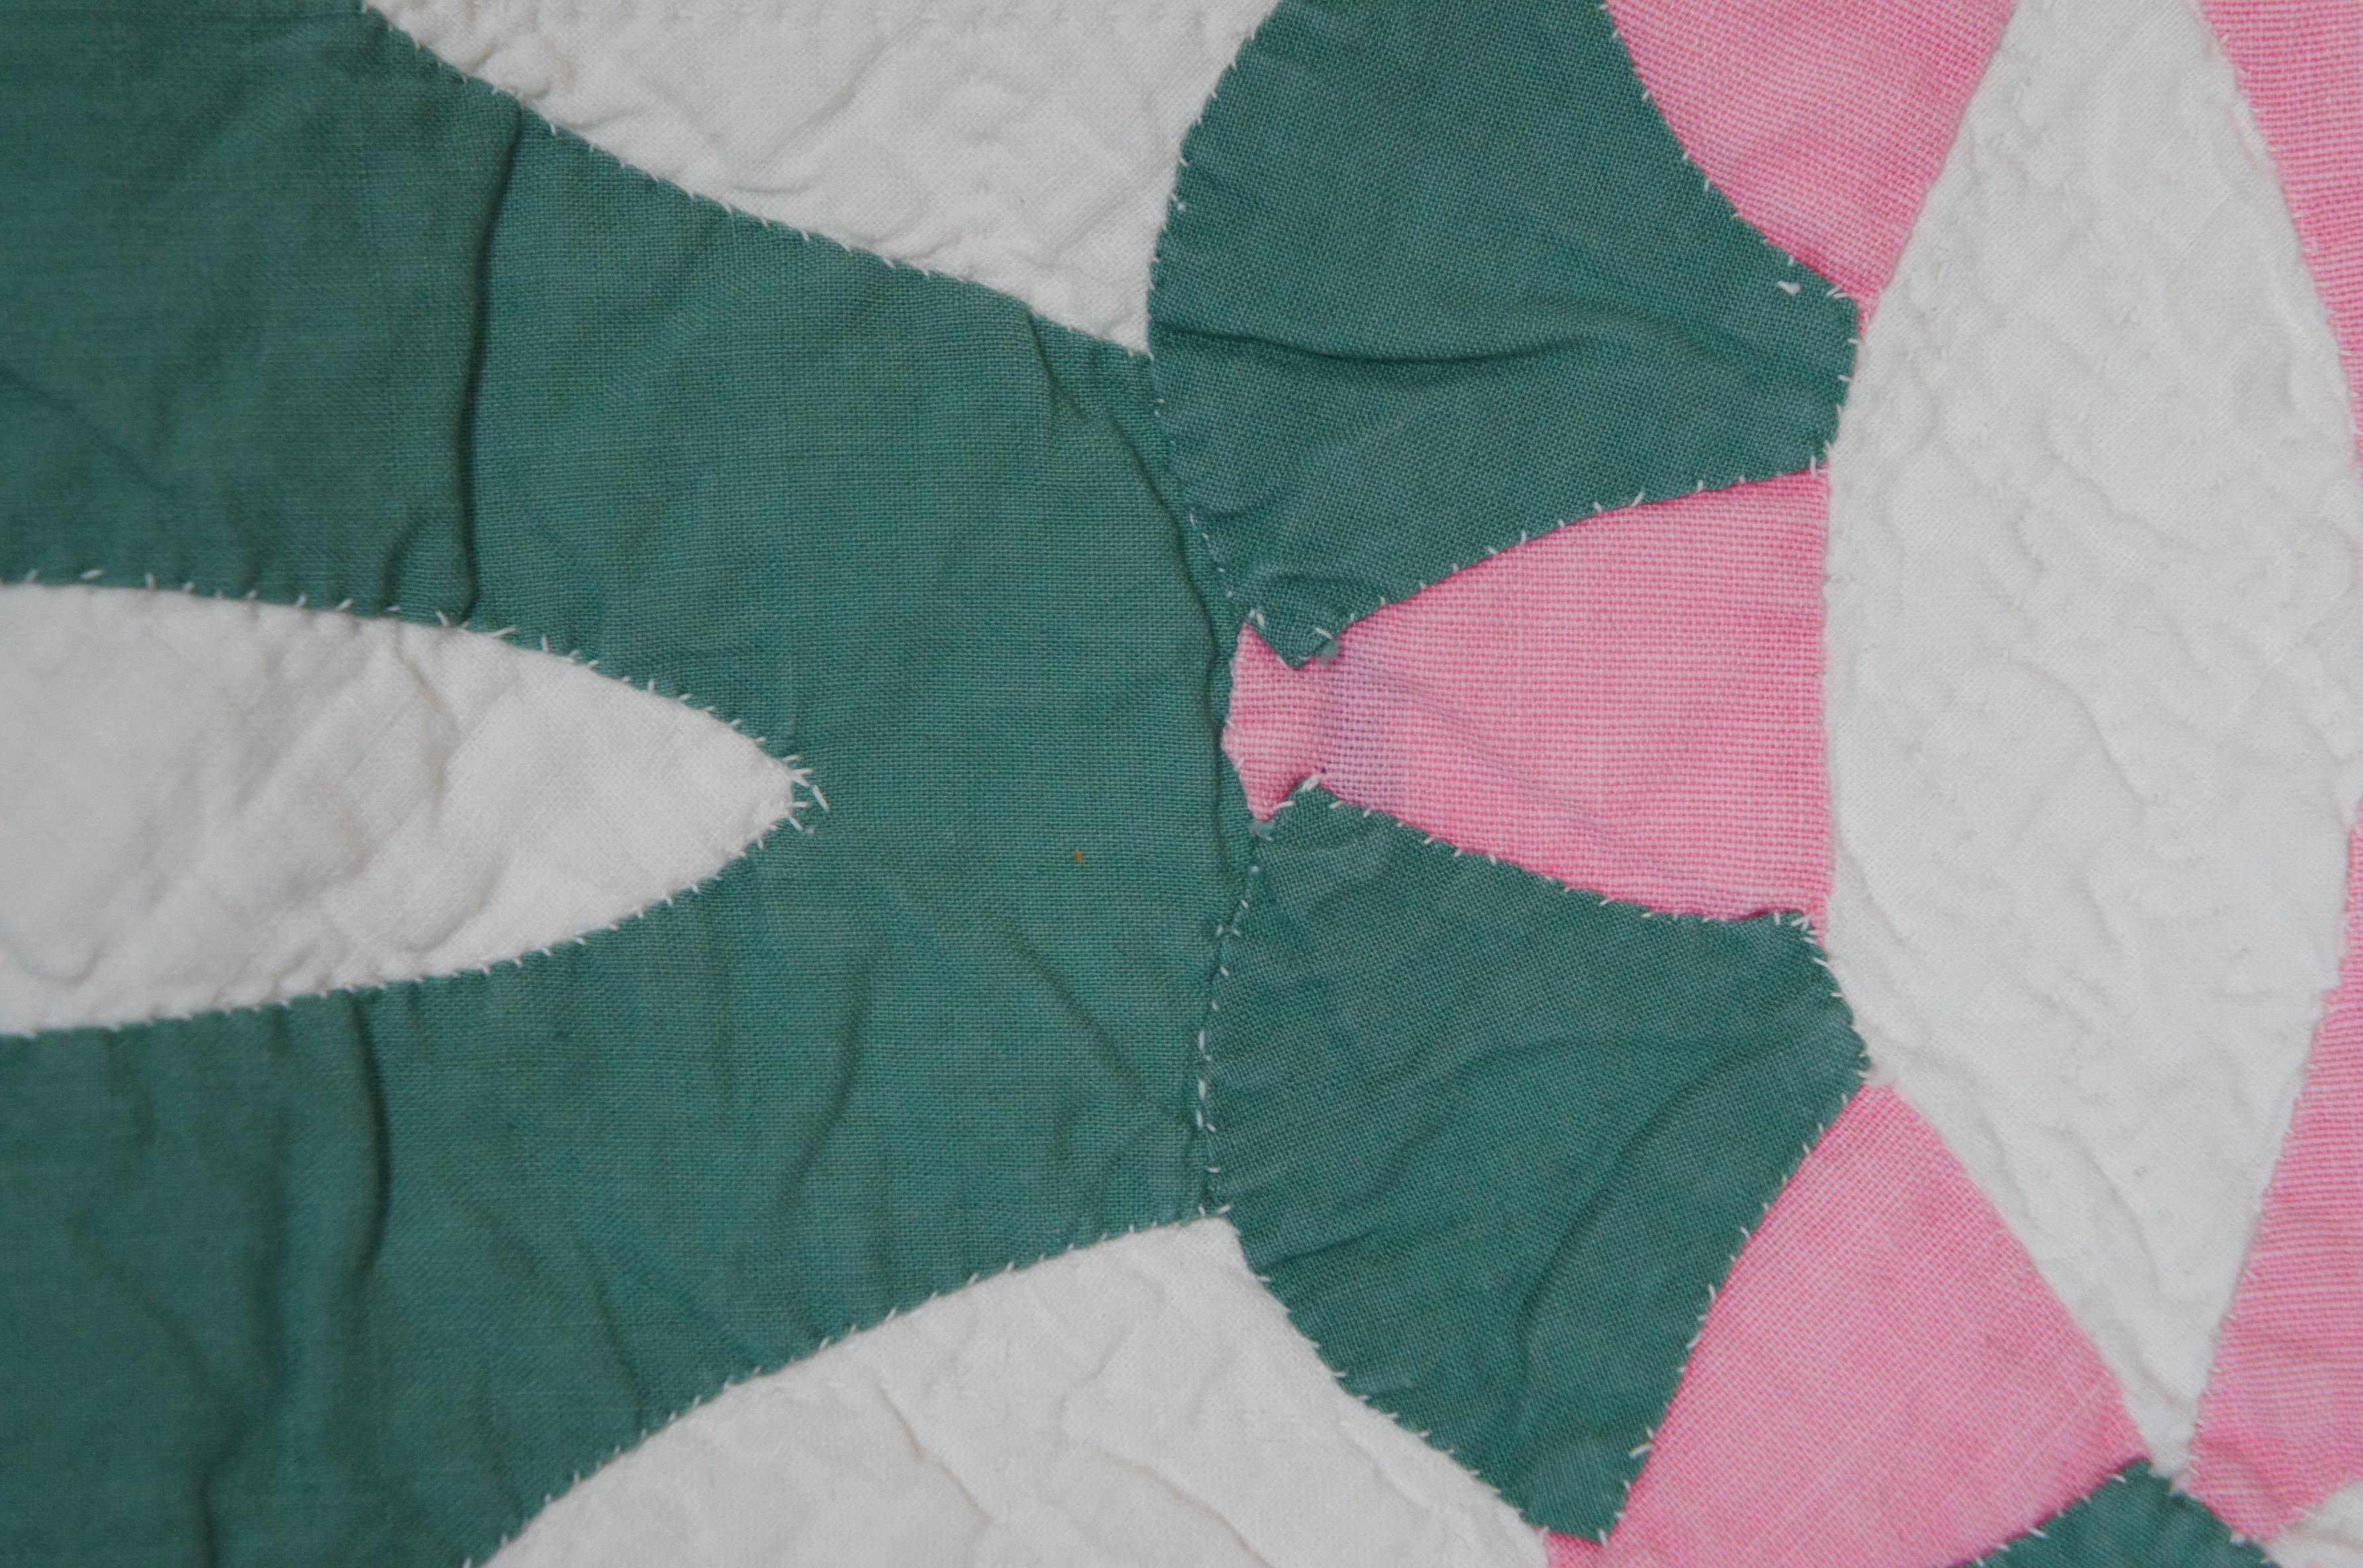 Antique Hand Stitched Rose of Sharon Quilt Bedspread Pink Green In Good Condition For Sale In Dayton, OH